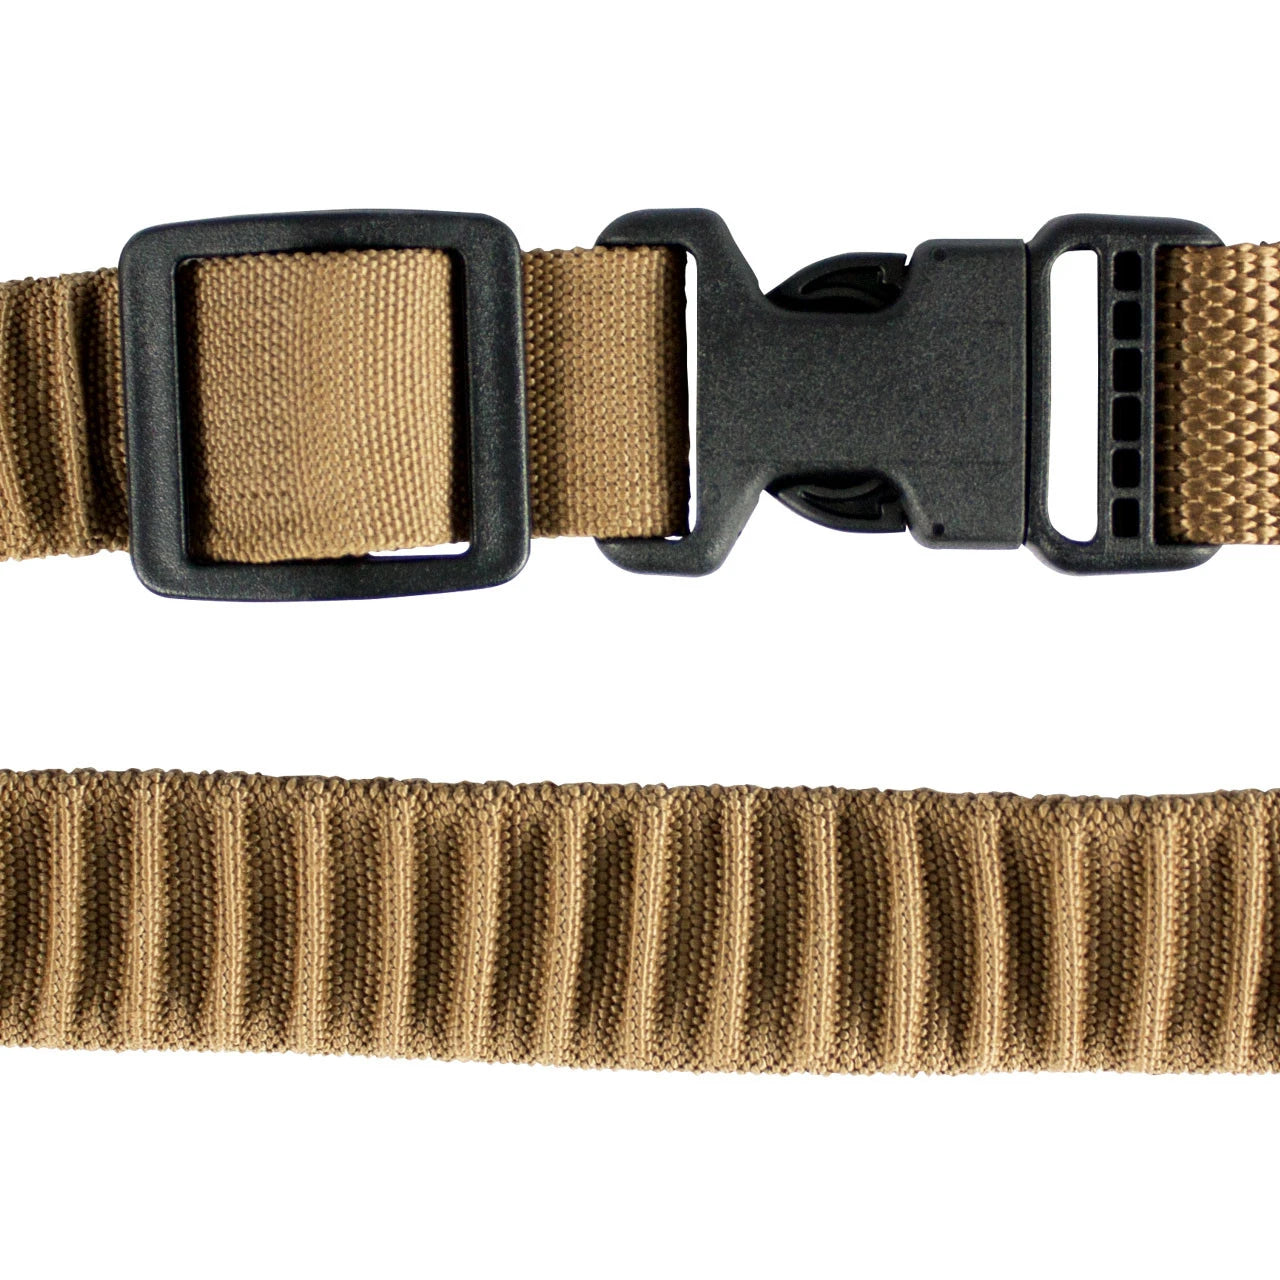 US Tactical  MOLLE Shock Webbing Sling with QD Swivel – Army Navy Marine  Store